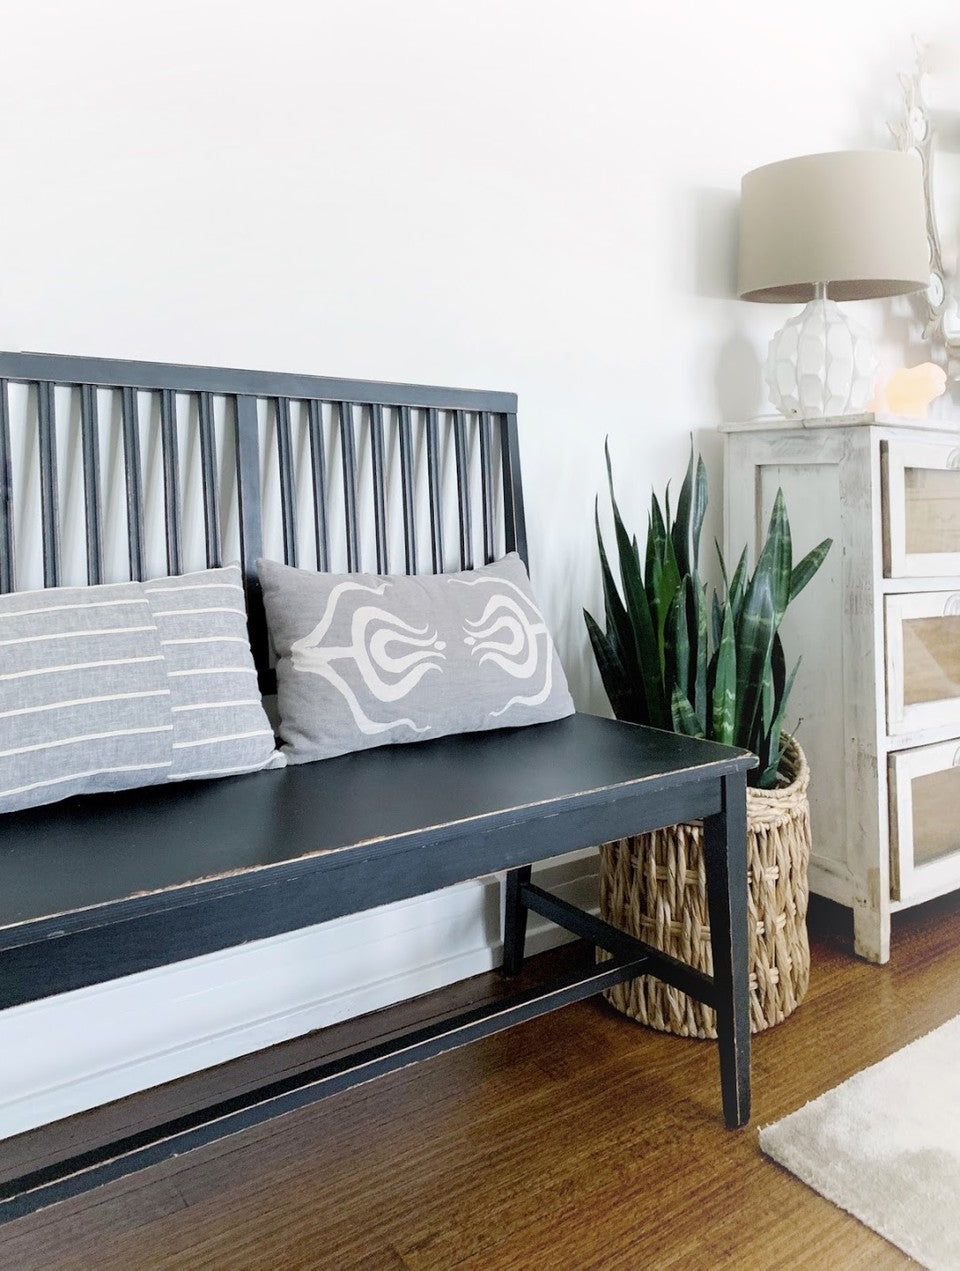 black wooden bench in front of white wall with two grey lumbar pillows on top